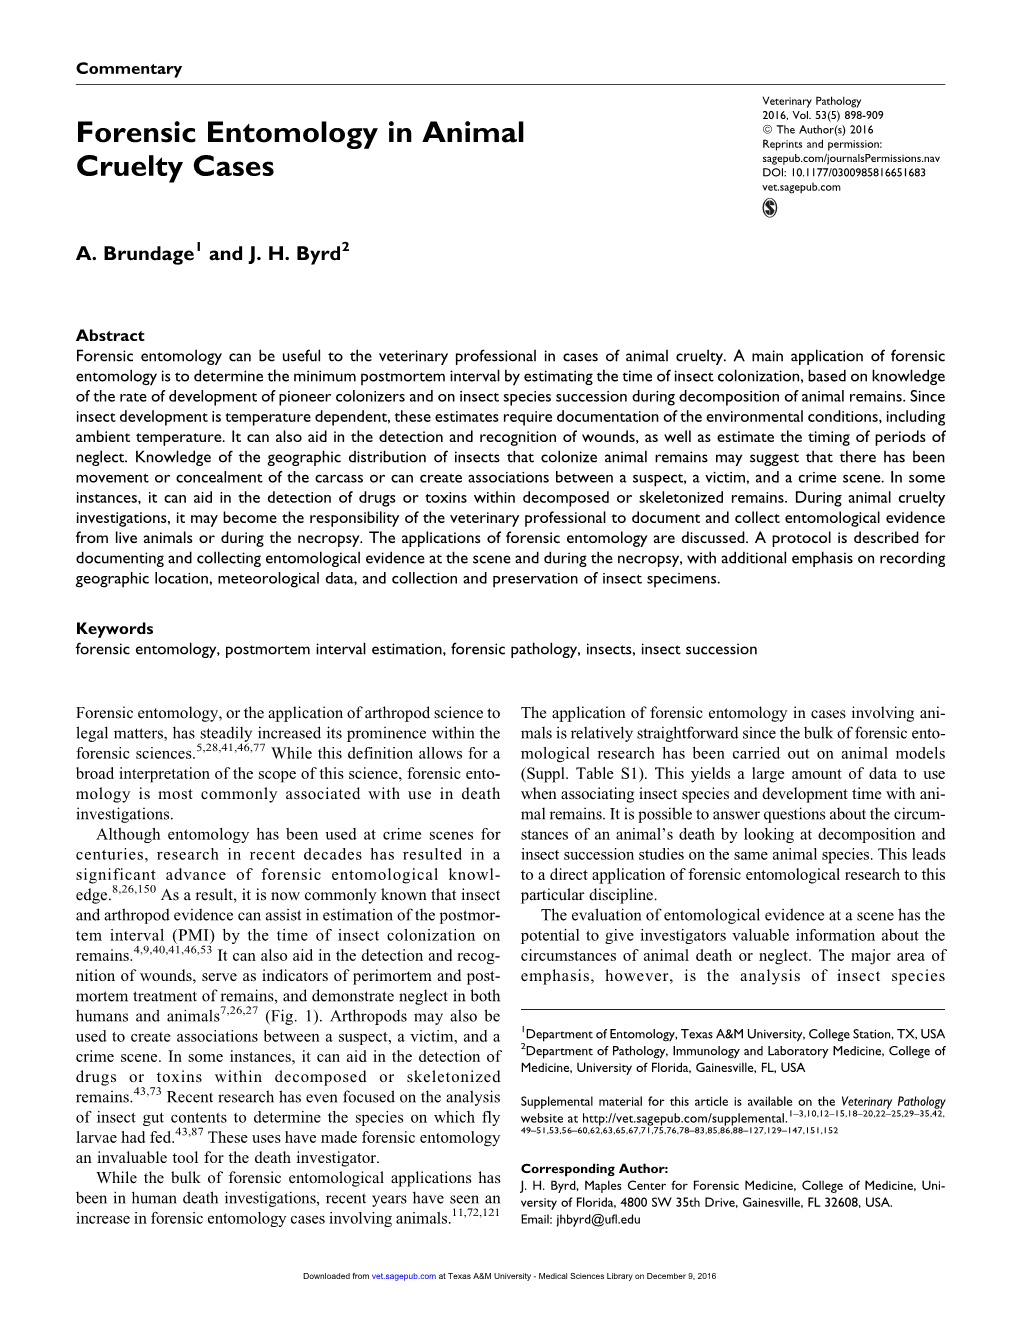 Forensic Entomology in Animal Cruelty Cases